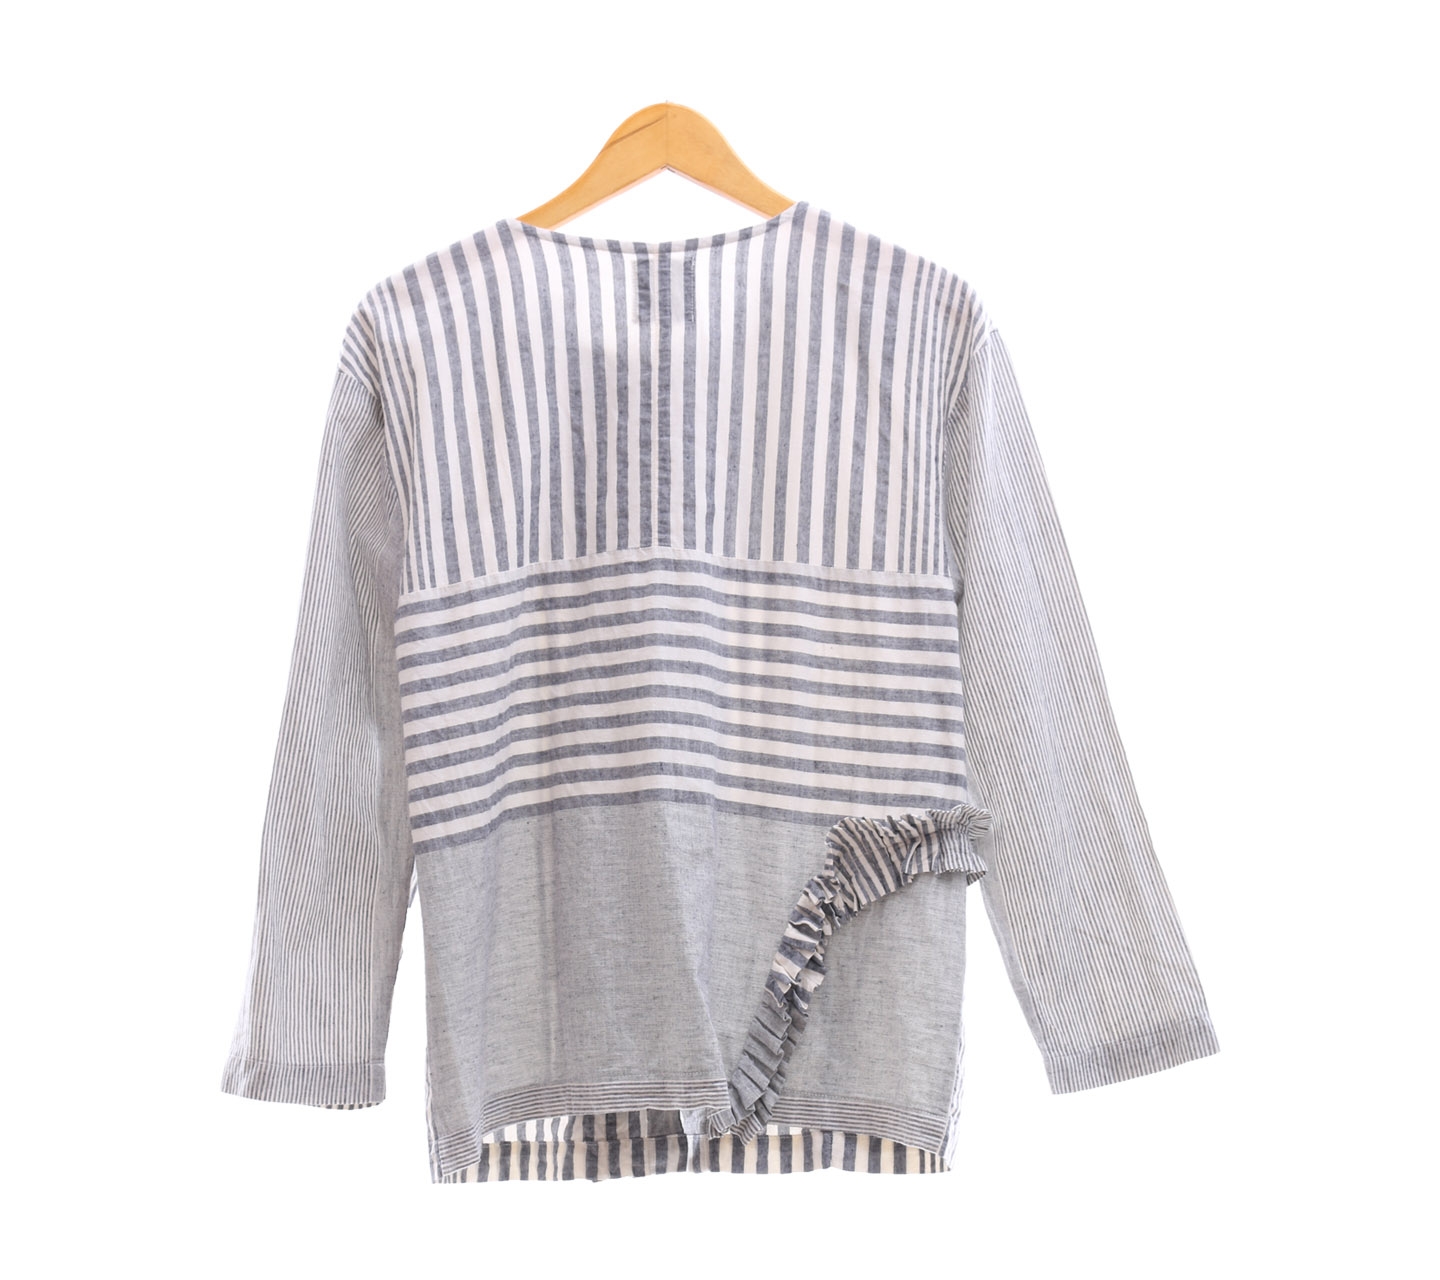 Slovv Grey and White Striped Blouse